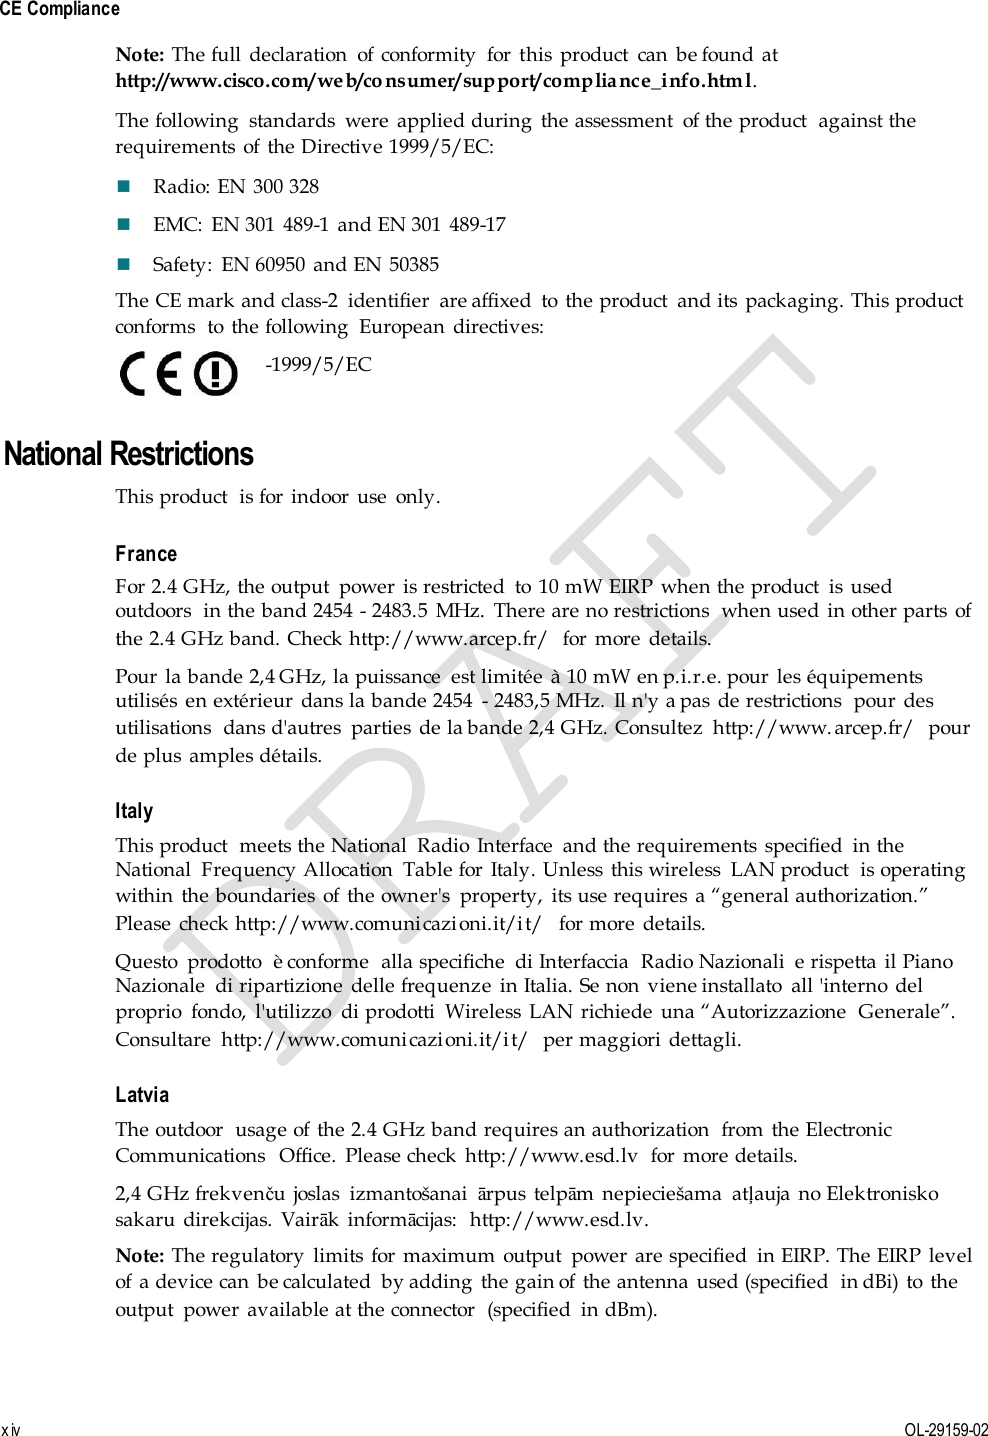  CE Compliance x iv  OL-29159-02 Note: The full  declaration  of  conformity  for  this  product  can  be found  at http://www.cisco.com/web/co nsumer/support/compliance_info.htm l. The following  standards  were  applied during  the assessment  of the product  against the requirements  of  the Directive 1999/5/EC:  Radio: EN  300 328  EMC:  EN 301  489-1  and EN 301  489-17  Safety:  EN 60950  and EN 50385 The CE mark and class-2  identifier  are affixed  to  the product  and its  packaging. This product conforms  to  the following  European  directives:    -1999/5/EC National Restrictions This product  is for  indoor  use  only. France For 2.4 GHz, the output  power  is restricted  to  10 mW EIRP  when the product  is  used outdoors  in the band 2454 - 2483.5  MHz.  There are no restrictions  when used  in other parts  of the 2.4 GHz band. Check http://www.arcep.fr/  for  more  details. Pour  la bande 2,4 GHz, la puissance  est limitée  à 10 mW en p.i.r.e. pour  les équipements utilisés  en extérieur  dans la bande 2454  - 2483,5 MHz.  Il n&apos;y a pas  de restrictions  pour  des utilisations  dans d&apos;autres  parties  de la bande 2,4 GHz. Consultez  http://www. arcep.fr/  pour de plus  amples détails. Italy This product  meets the National  Radio  Interface  and the requirements  specified  in the National  Frequency Allocation  Table for  Italy. Unless  this wireless  LAN product  is operating within  the boundaries  of  the owner&apos;s  property,  its use requires  a “general authorization.” Please  check http://www.comunicazioni.it/it/  for more  details. Questo  prodotto  è conforme  alla specifiche  di Interfaccia  Radio Nazionali  e rispetta  il Piano Nazionale  di ripartizione  delle frequenze  in Italia. Se non  viene installato  all &apos;interno  del proprio  fondo,  l&apos;utilizzo  di prodotti  Wireless  LAN  richiede  una “Autorizzazione  Generale”. Consultare  http://www.comunicazioni.it/it/  per maggiori  dettagli. Latvia The outdoor  usage of  the 2.4 GHz band requires an authorization  from  the Electronic Communications  Office.  Please check  http://www.esd.lv  for  more details. 2,4 GHz frekvenču joslas  izmantošanai  ārpus  telpām  nepieciešama  atļauja  no Elektronisko sakaru  direkcijas.  Vairāk  informācijas:  http://www.esd.lv. Note: The regulatory  limits  for  maximum  output  power  are specified  in EIRP. The EIRP  level of  a device can  be calculated  by adding  the gain of  the antenna  used (specified  in dBi)  to  the output  power  available at the connector  (specified  in dBm). 